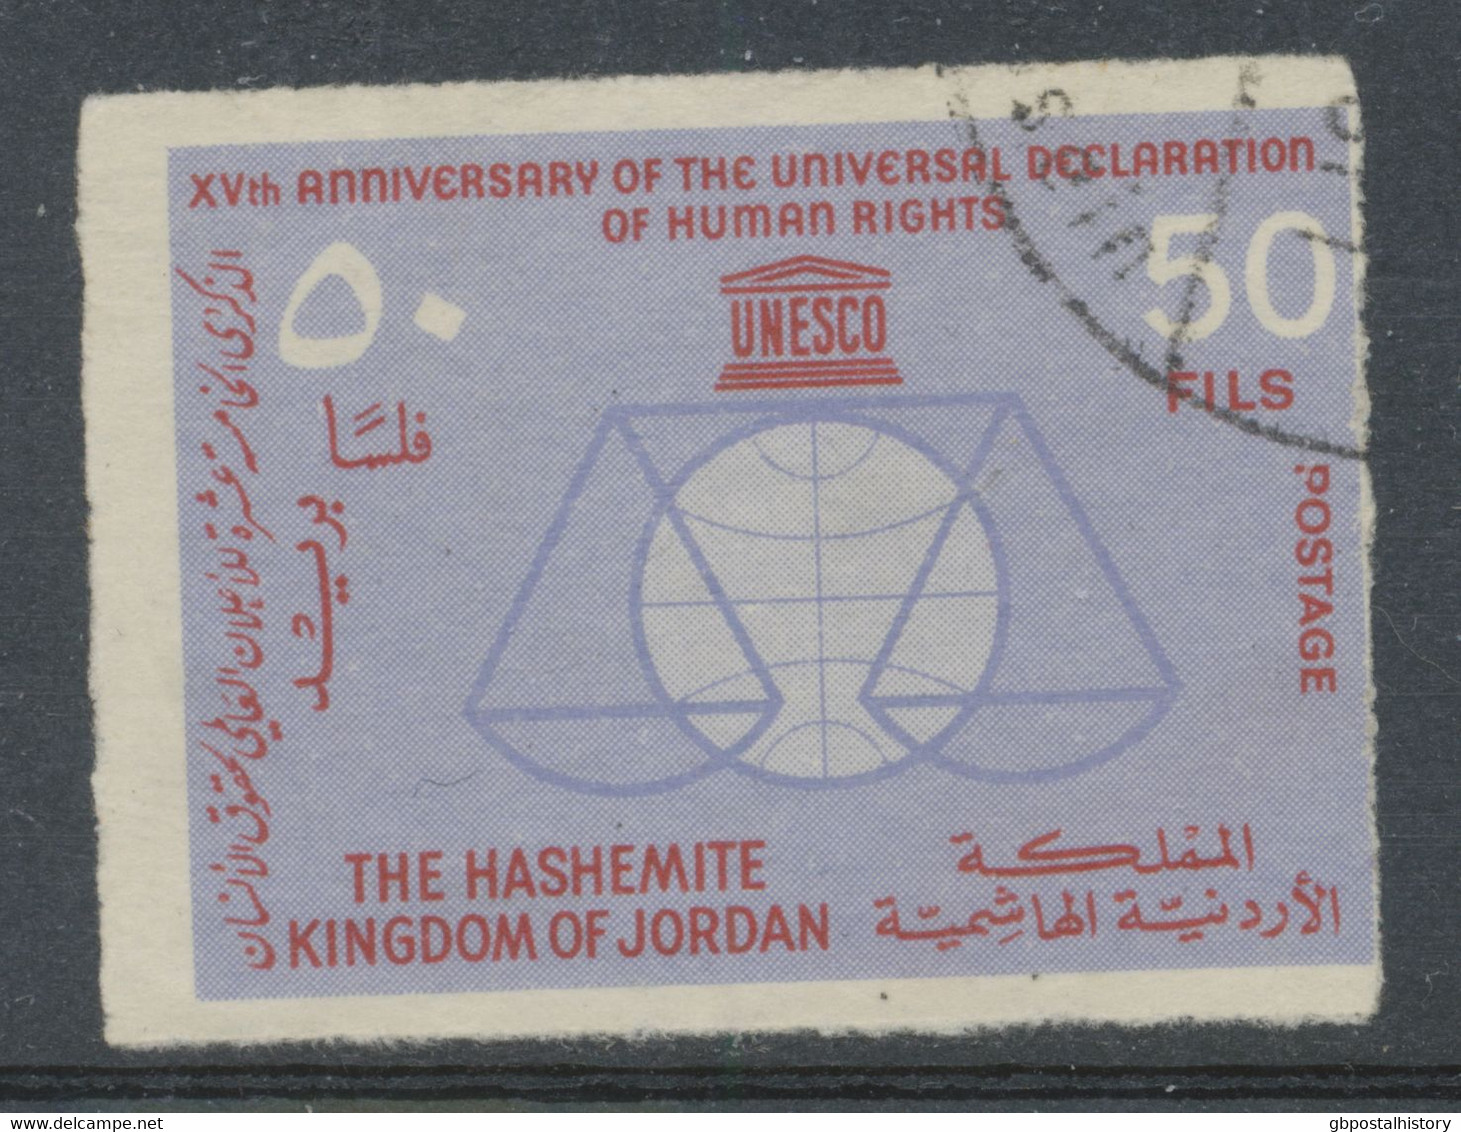 JORDAN 1963 15th Anniversary Of The Proclamation Of Human Rights By Unesco 50 F Very Fine Rouletted/imperforated Stamp - Jordan